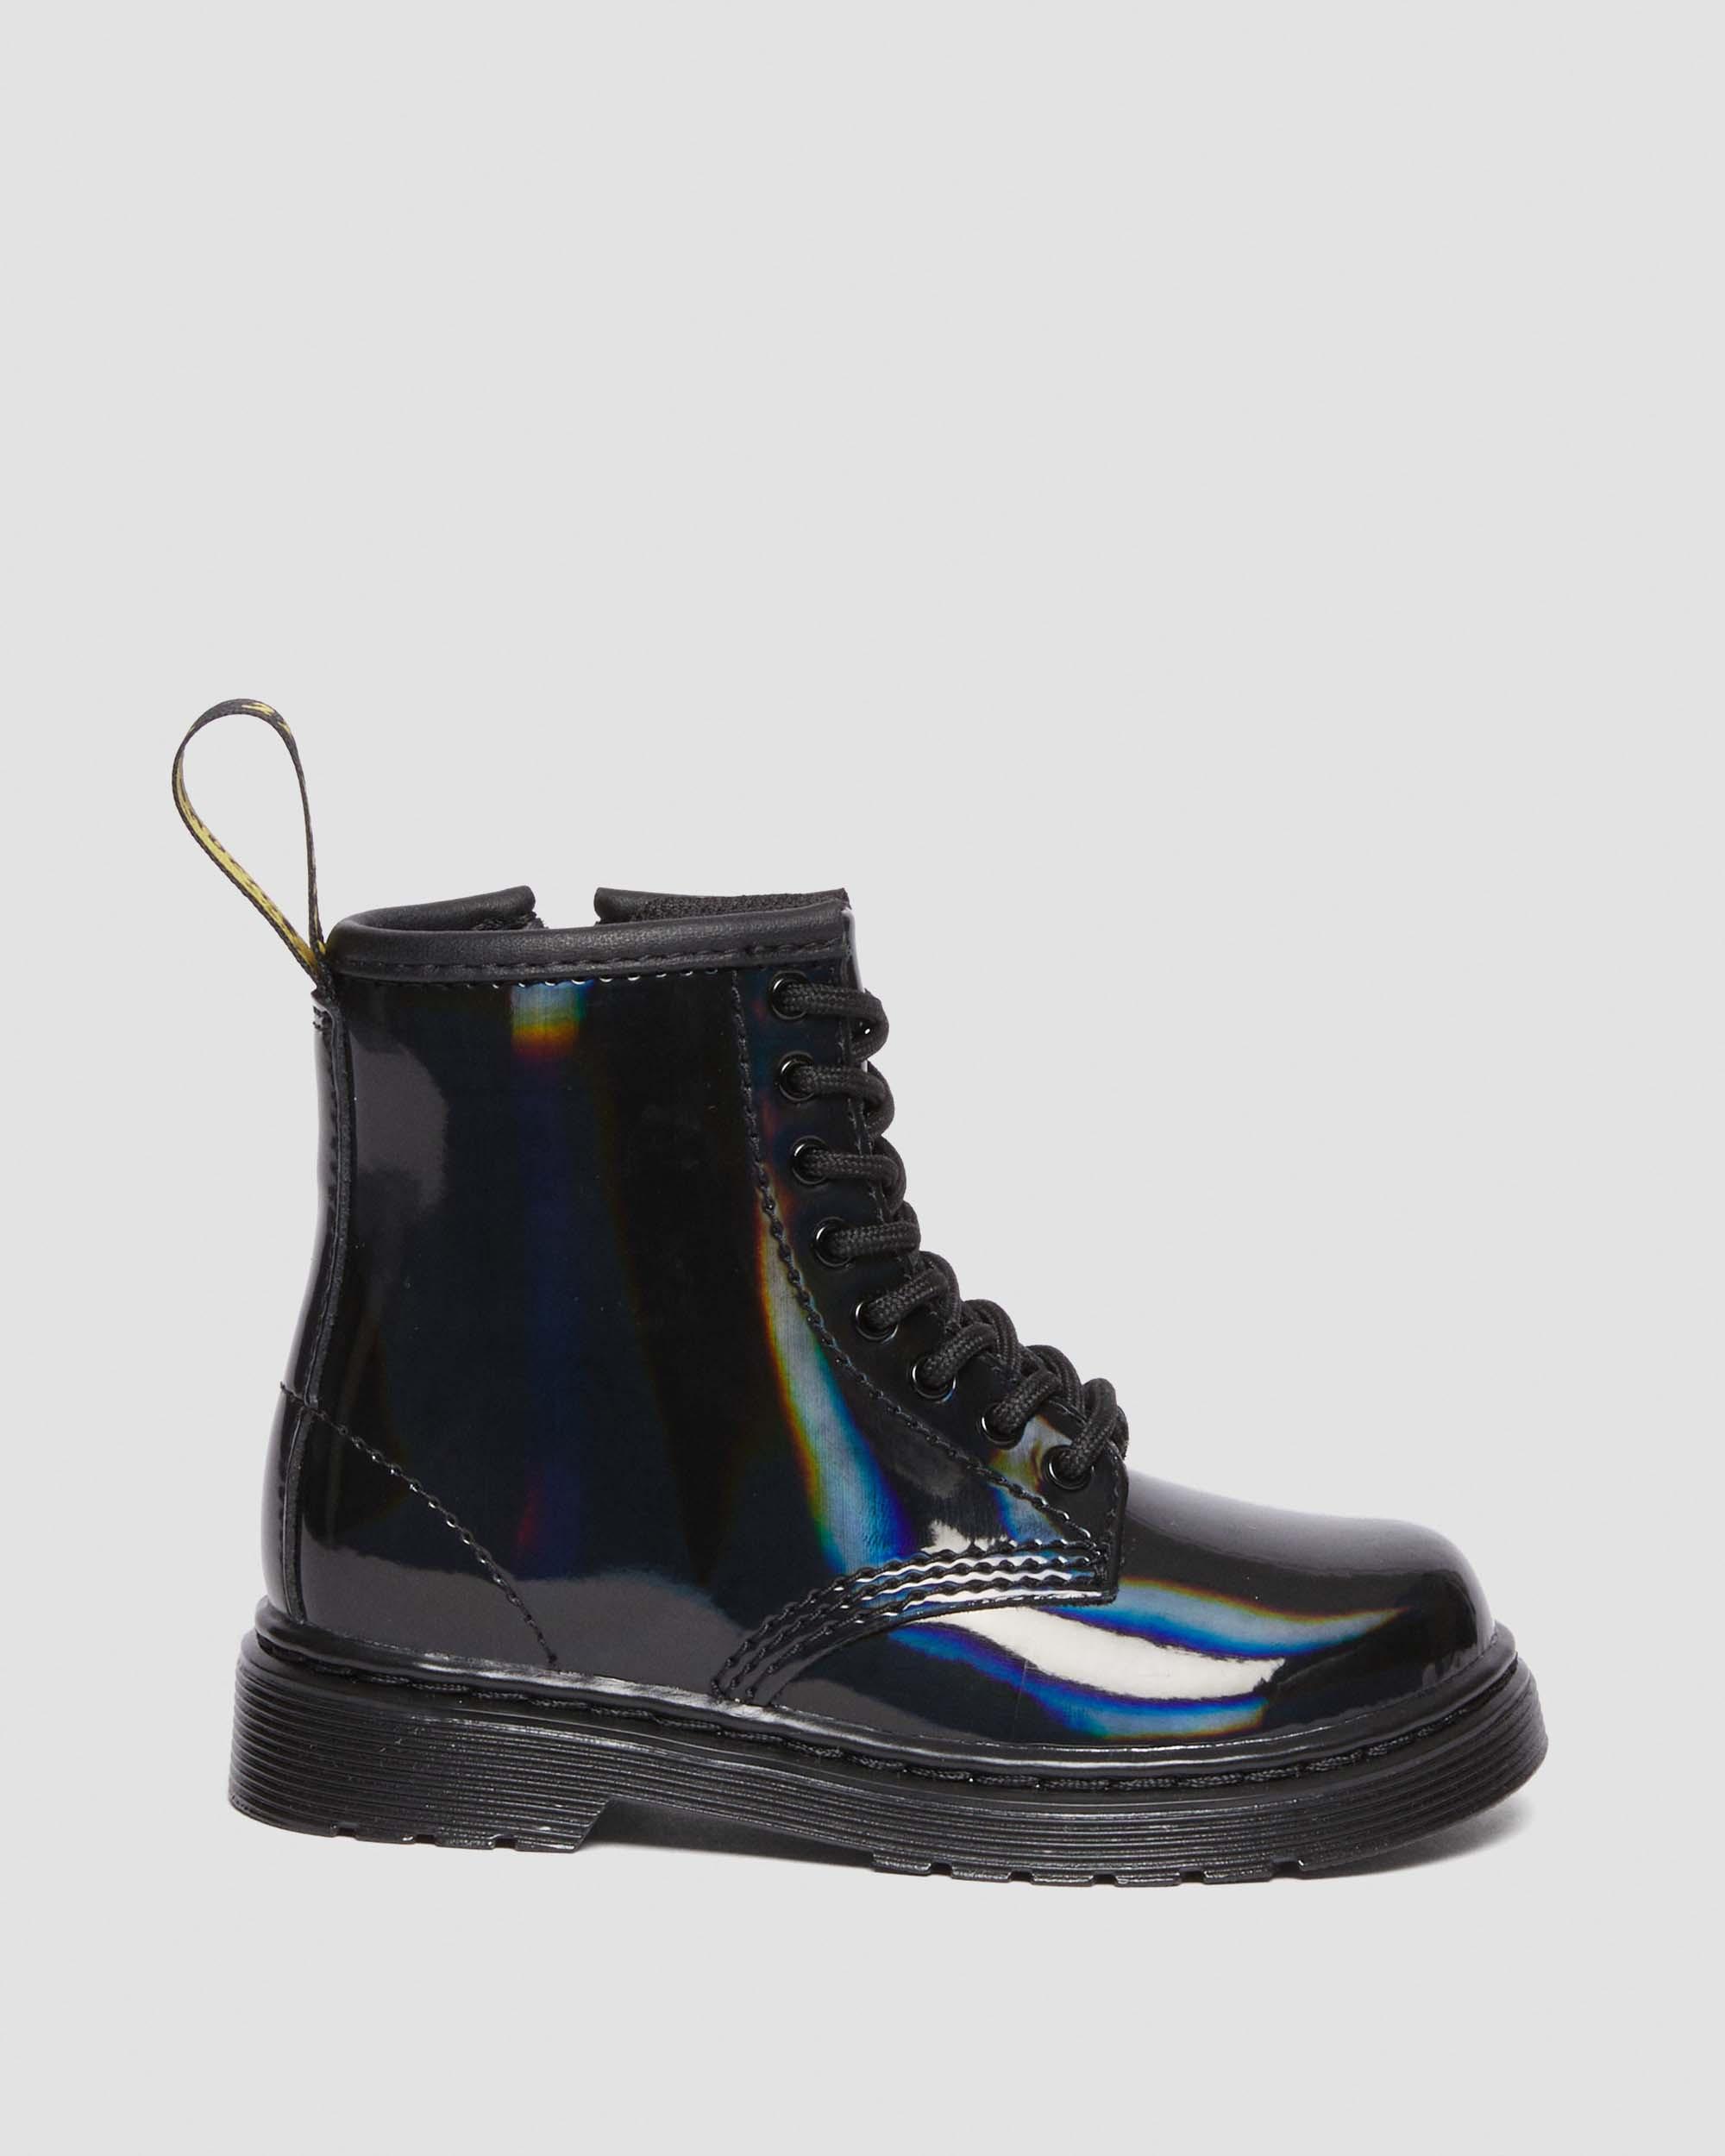 Toddler 1460 Rainbow Patent Leather Lace Up Boots in Black